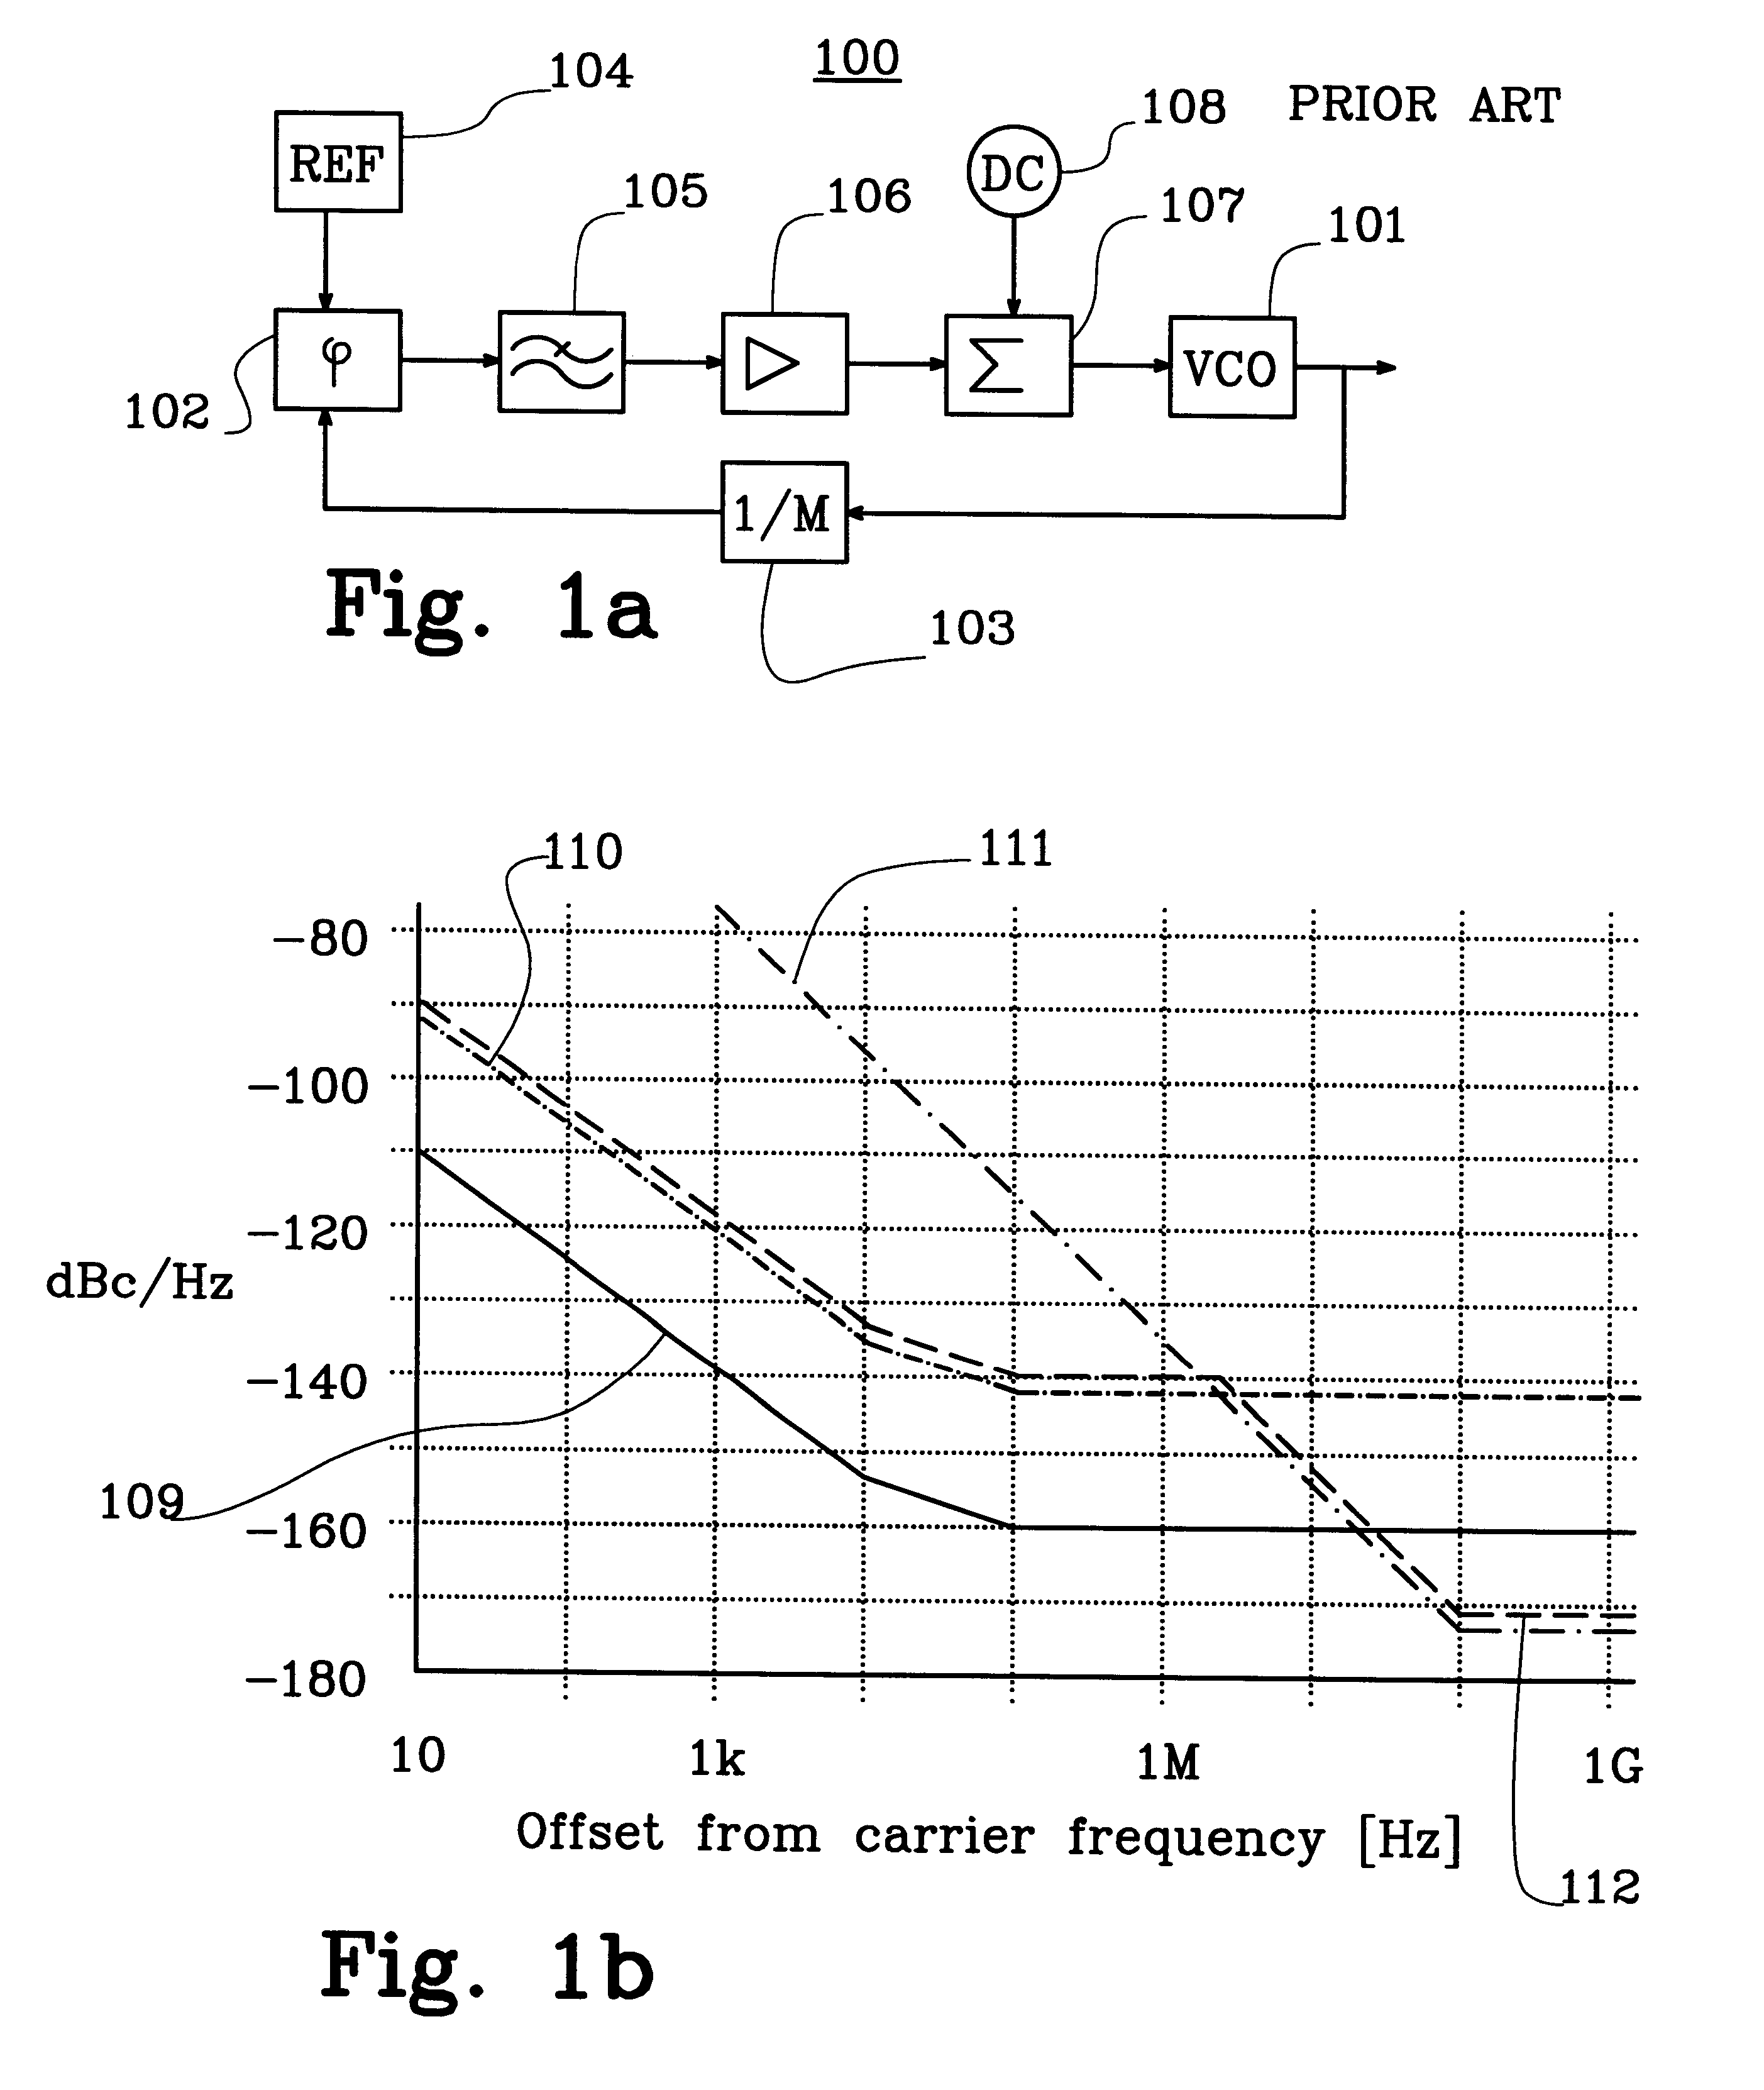 Phase locked loop arrangement in which VCO frequency is a fraction of reference frequency